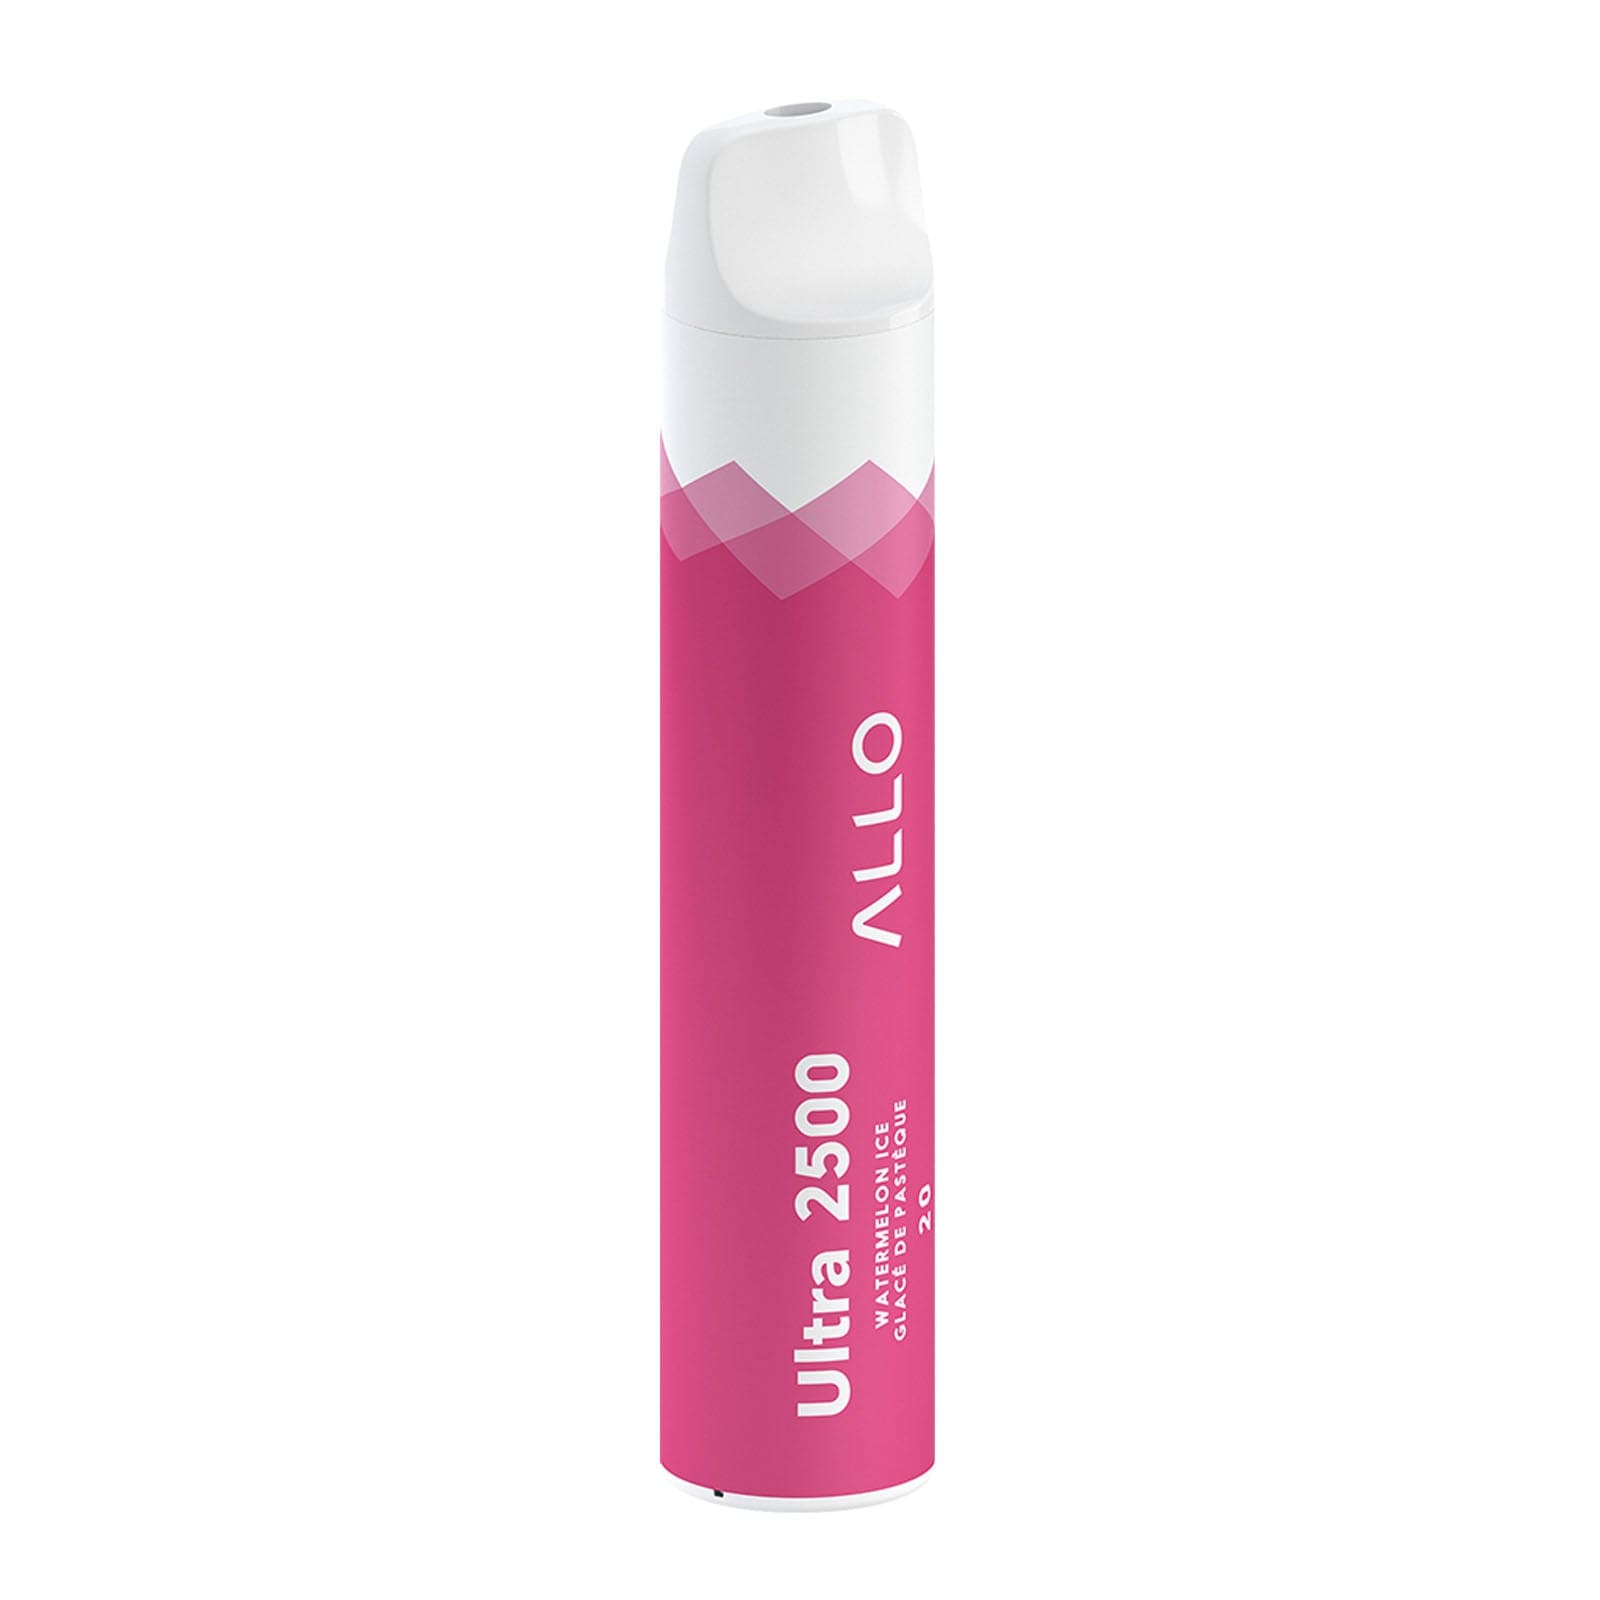 Allo Ultra 2500 - Watermelon Ice available on Canada online vape shop